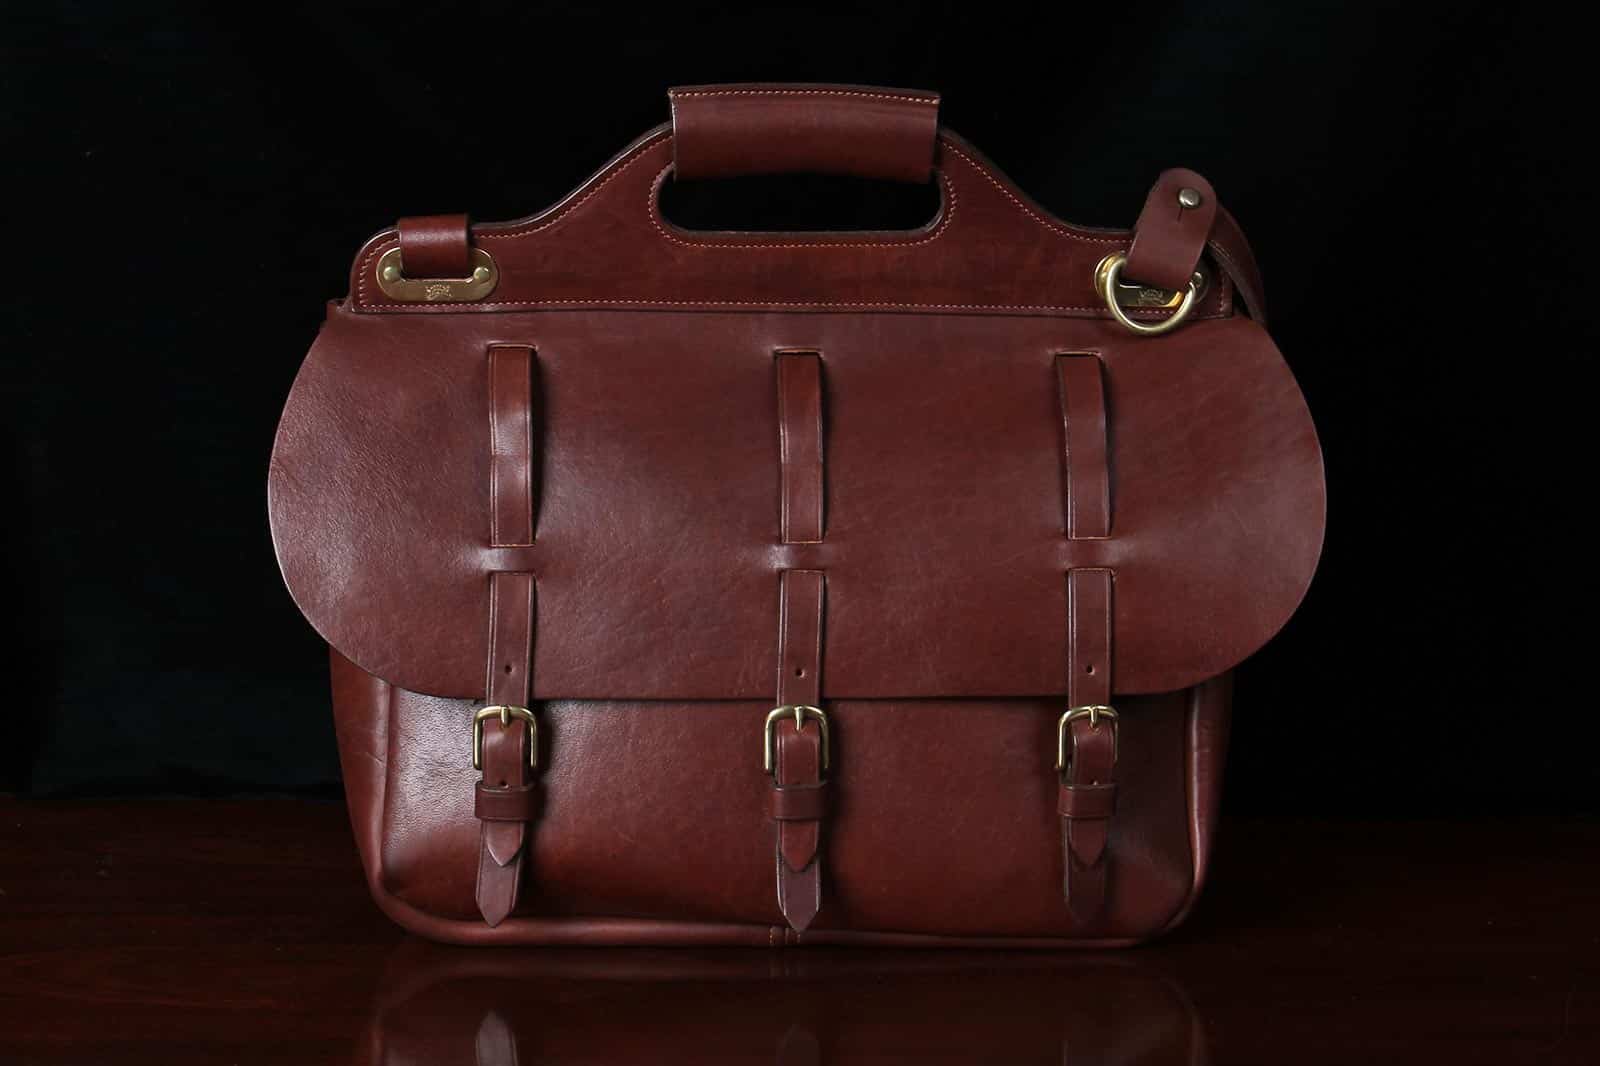 No. 1 Saddlebag Briefcase in Vintage Brown American Steerhide Leather - front view - clean and polished with leather balm